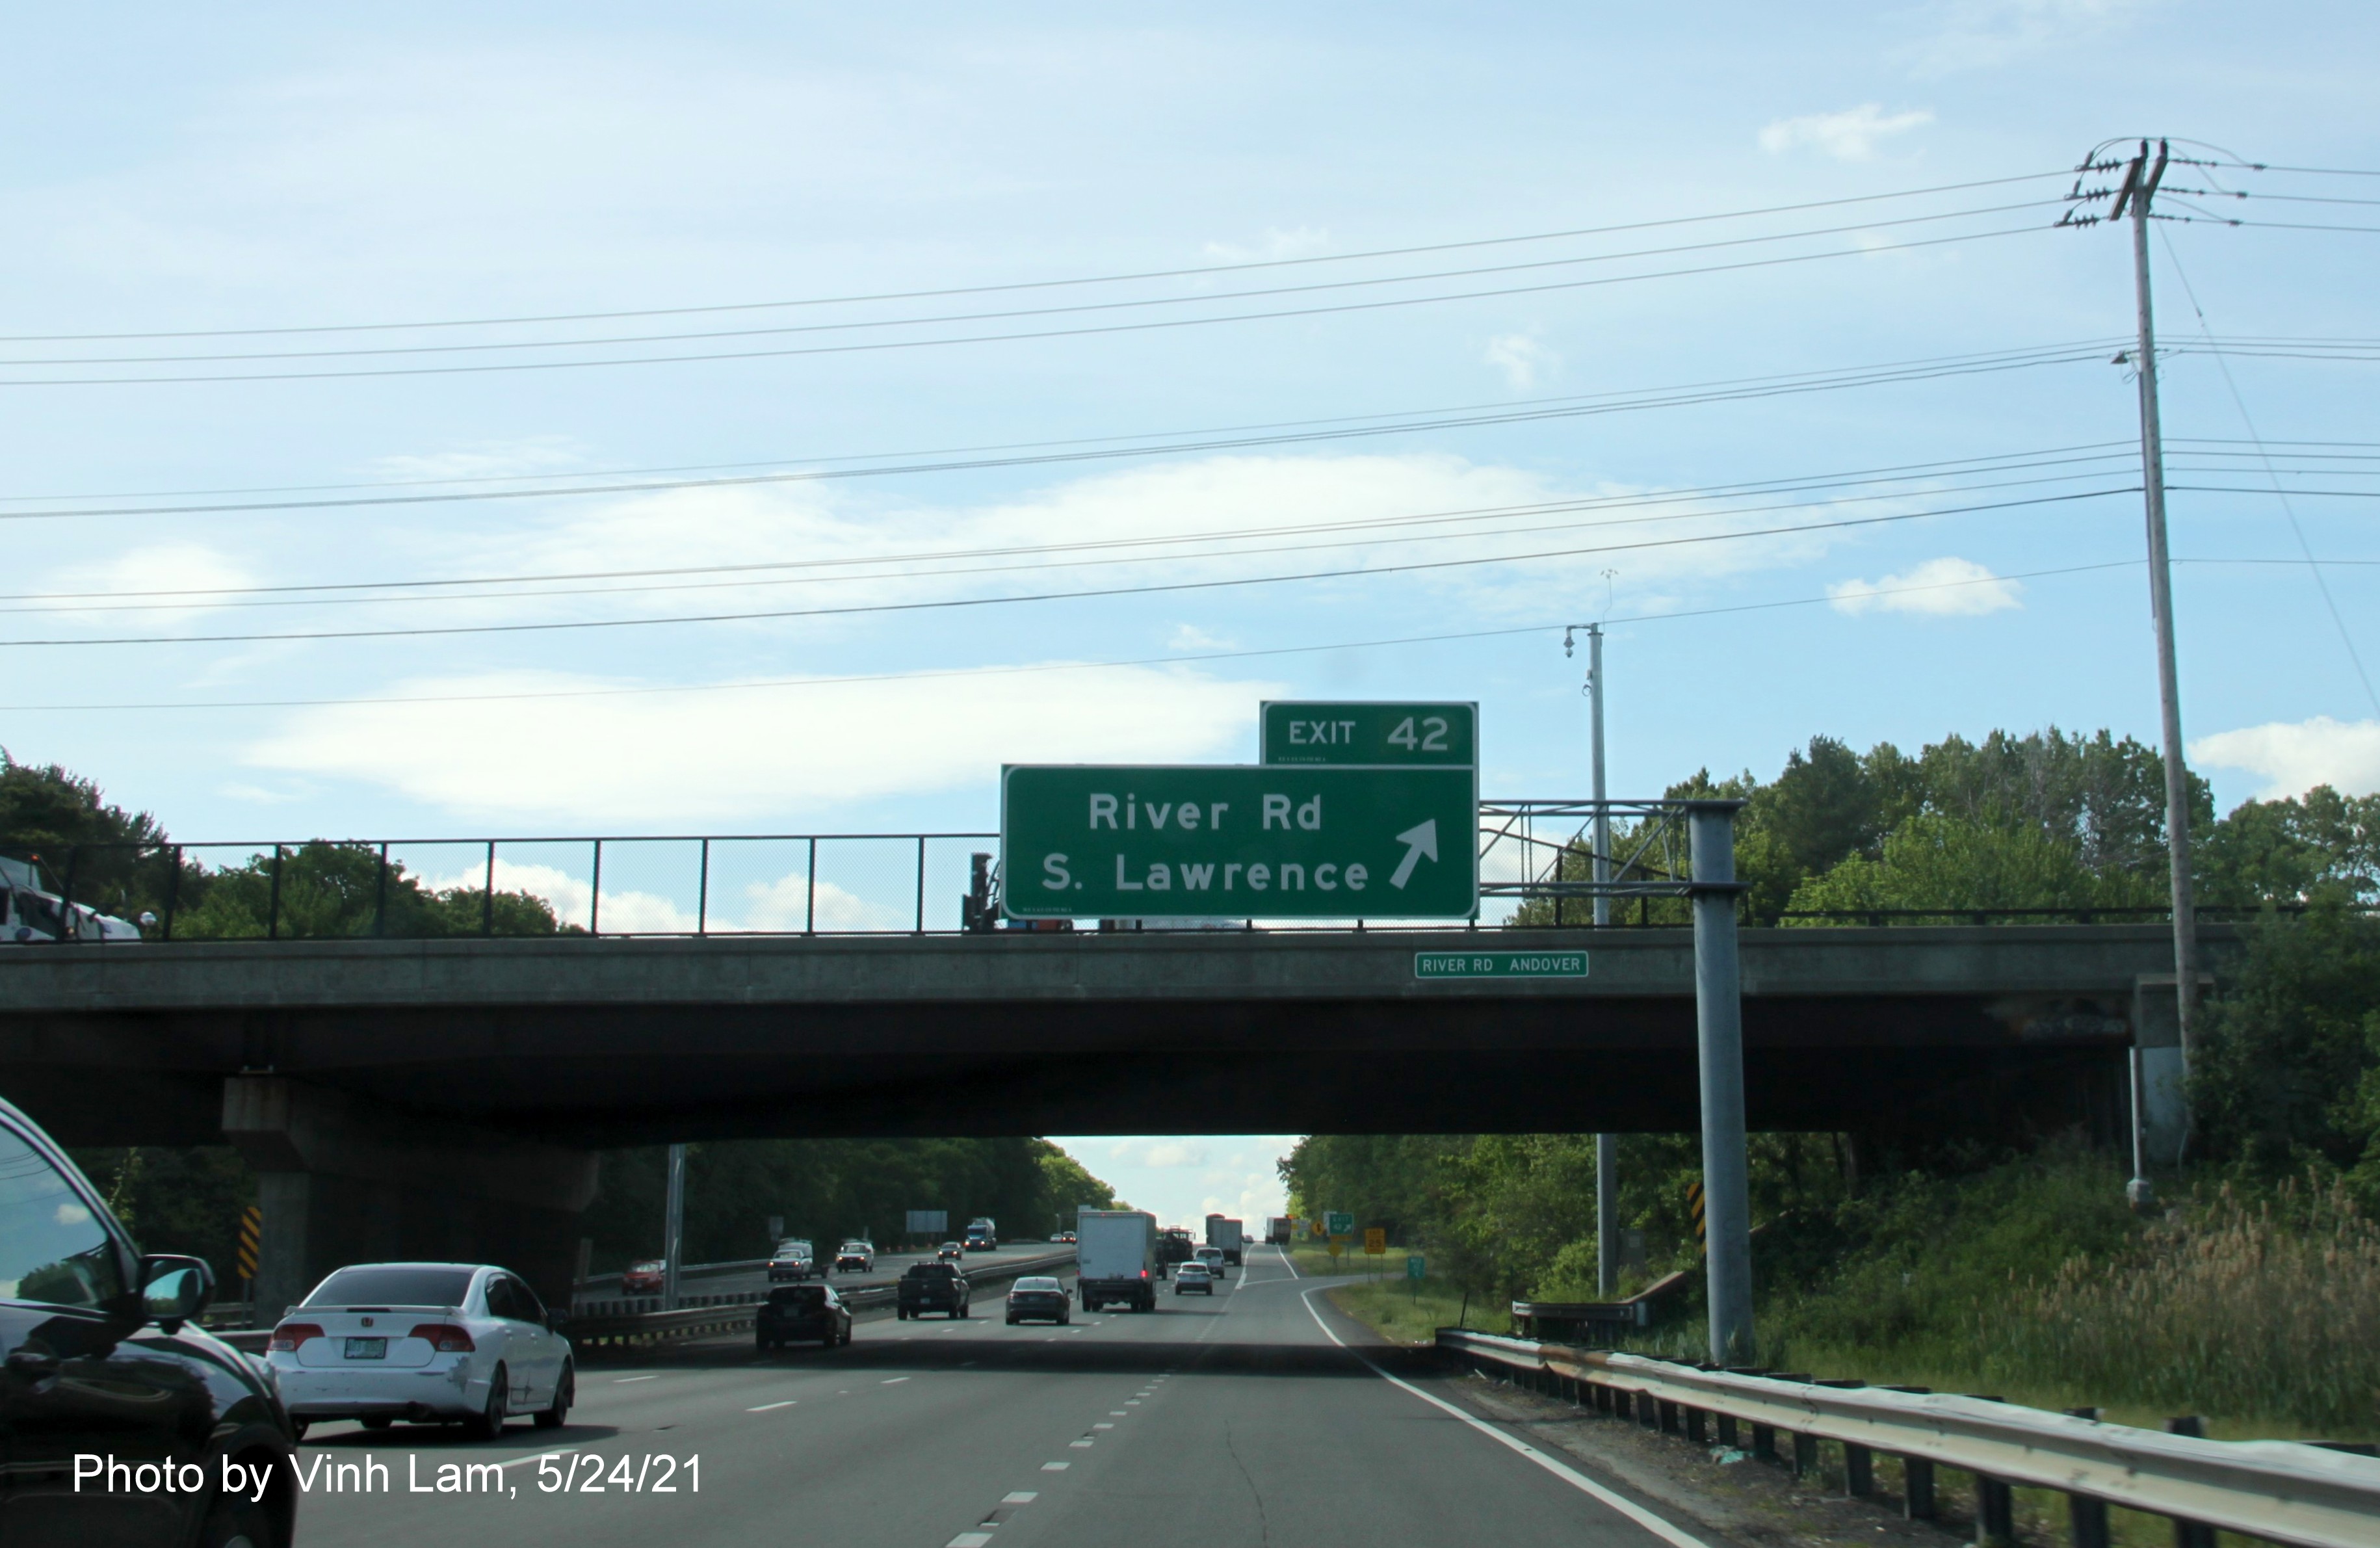 Image of overhead ramp sign for River Road exit with new milepost based exit number on I-93 South in Andover, by Vinh Lam, May 2021